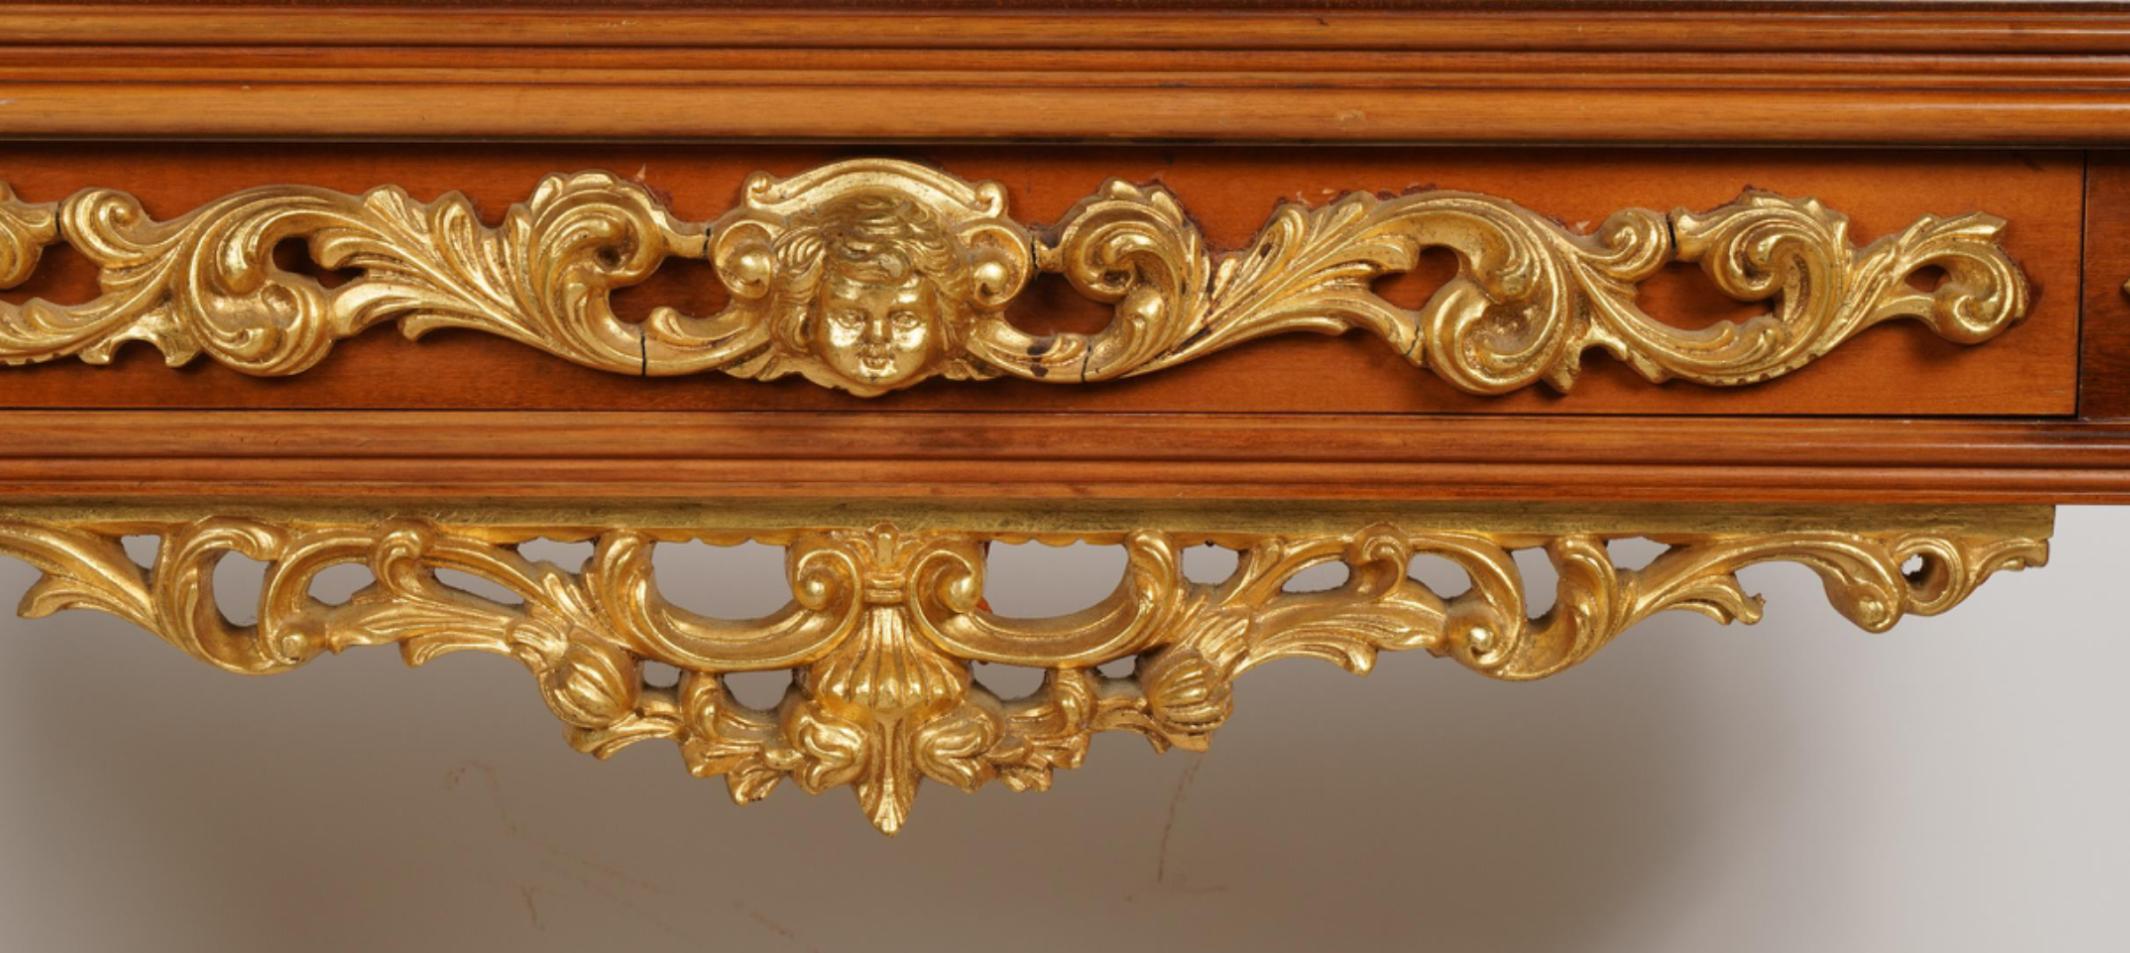 Antique Regency Style Giltwood & Mahogany Figural Console Table For Sale 1